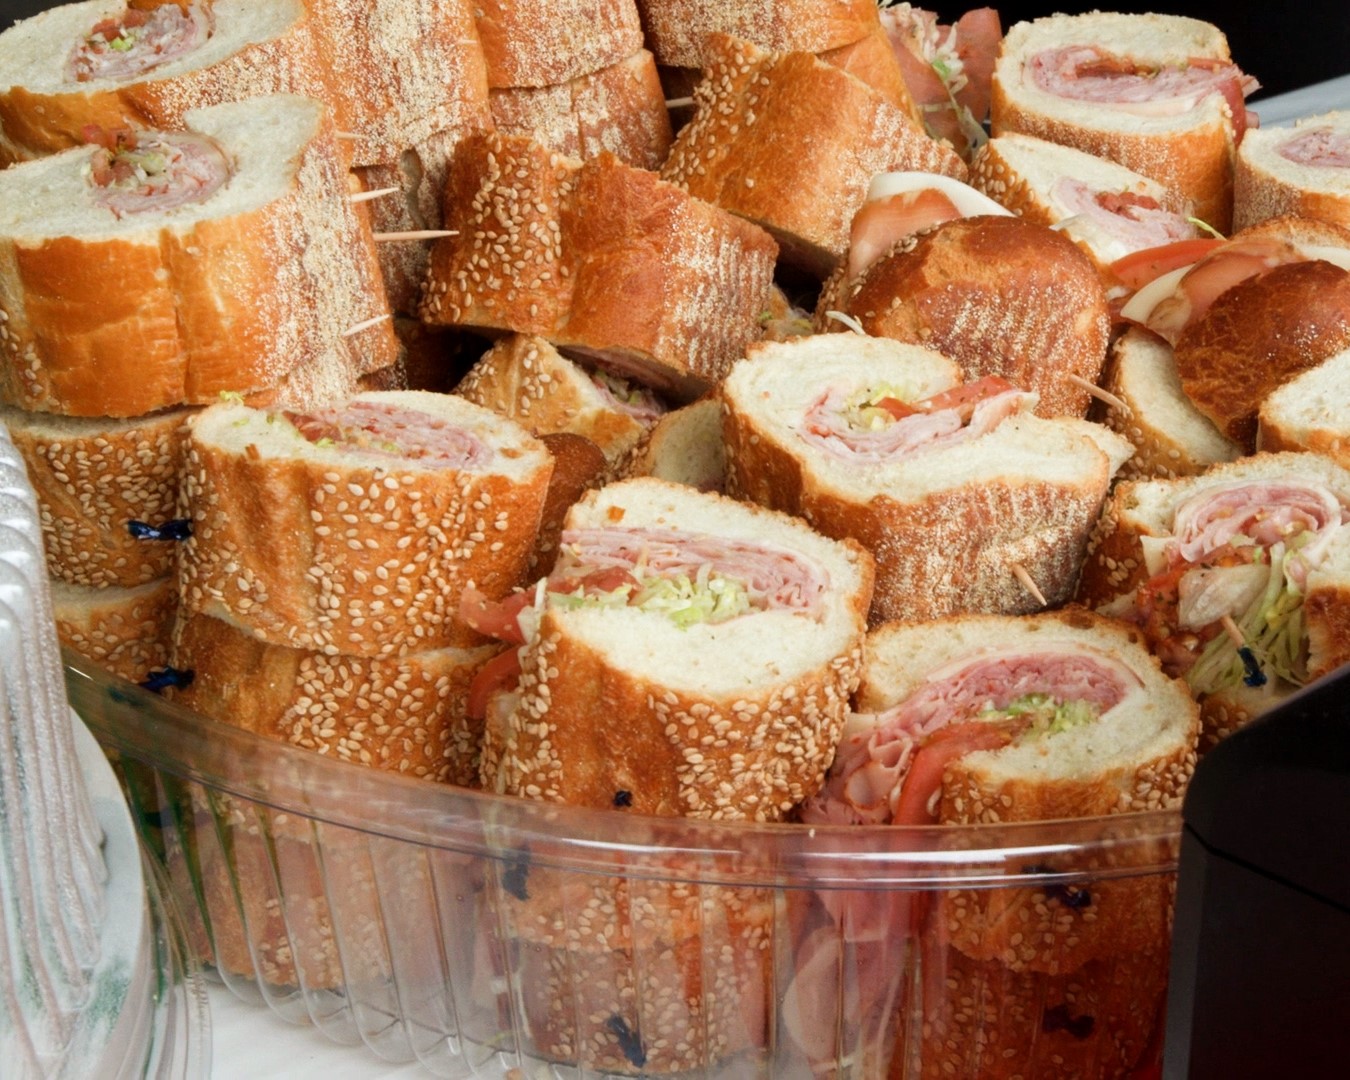 A photo of slices of Italian Hoagie samples at PrimoHoagies.